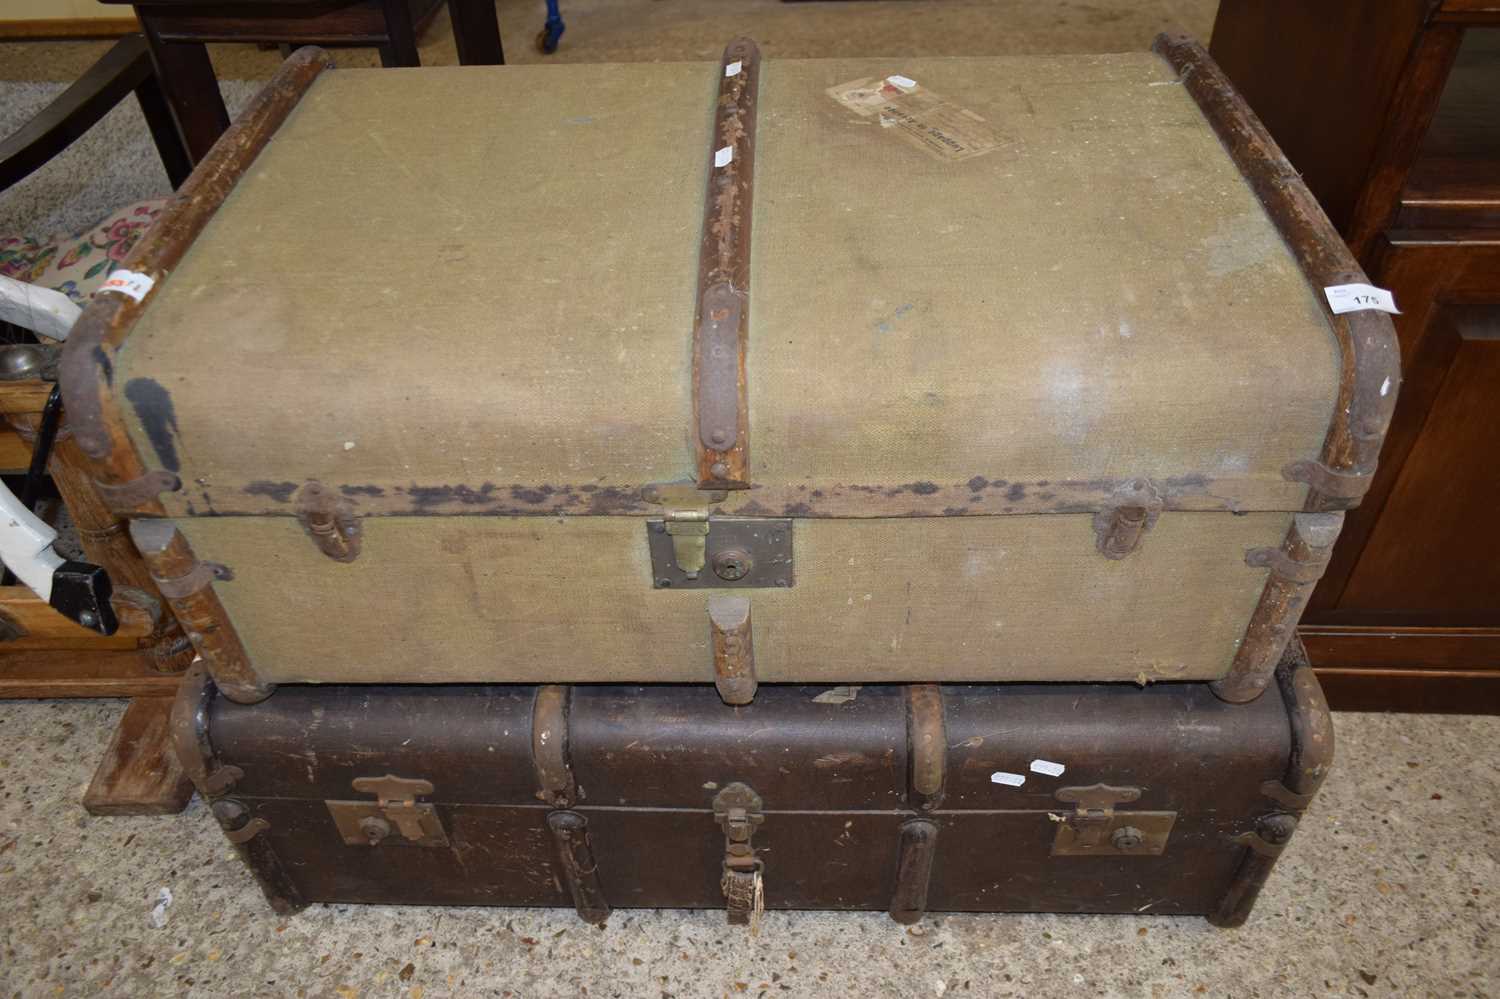 TWO VINTAGE WOODEN BOUND TRAVEL TRUNKS